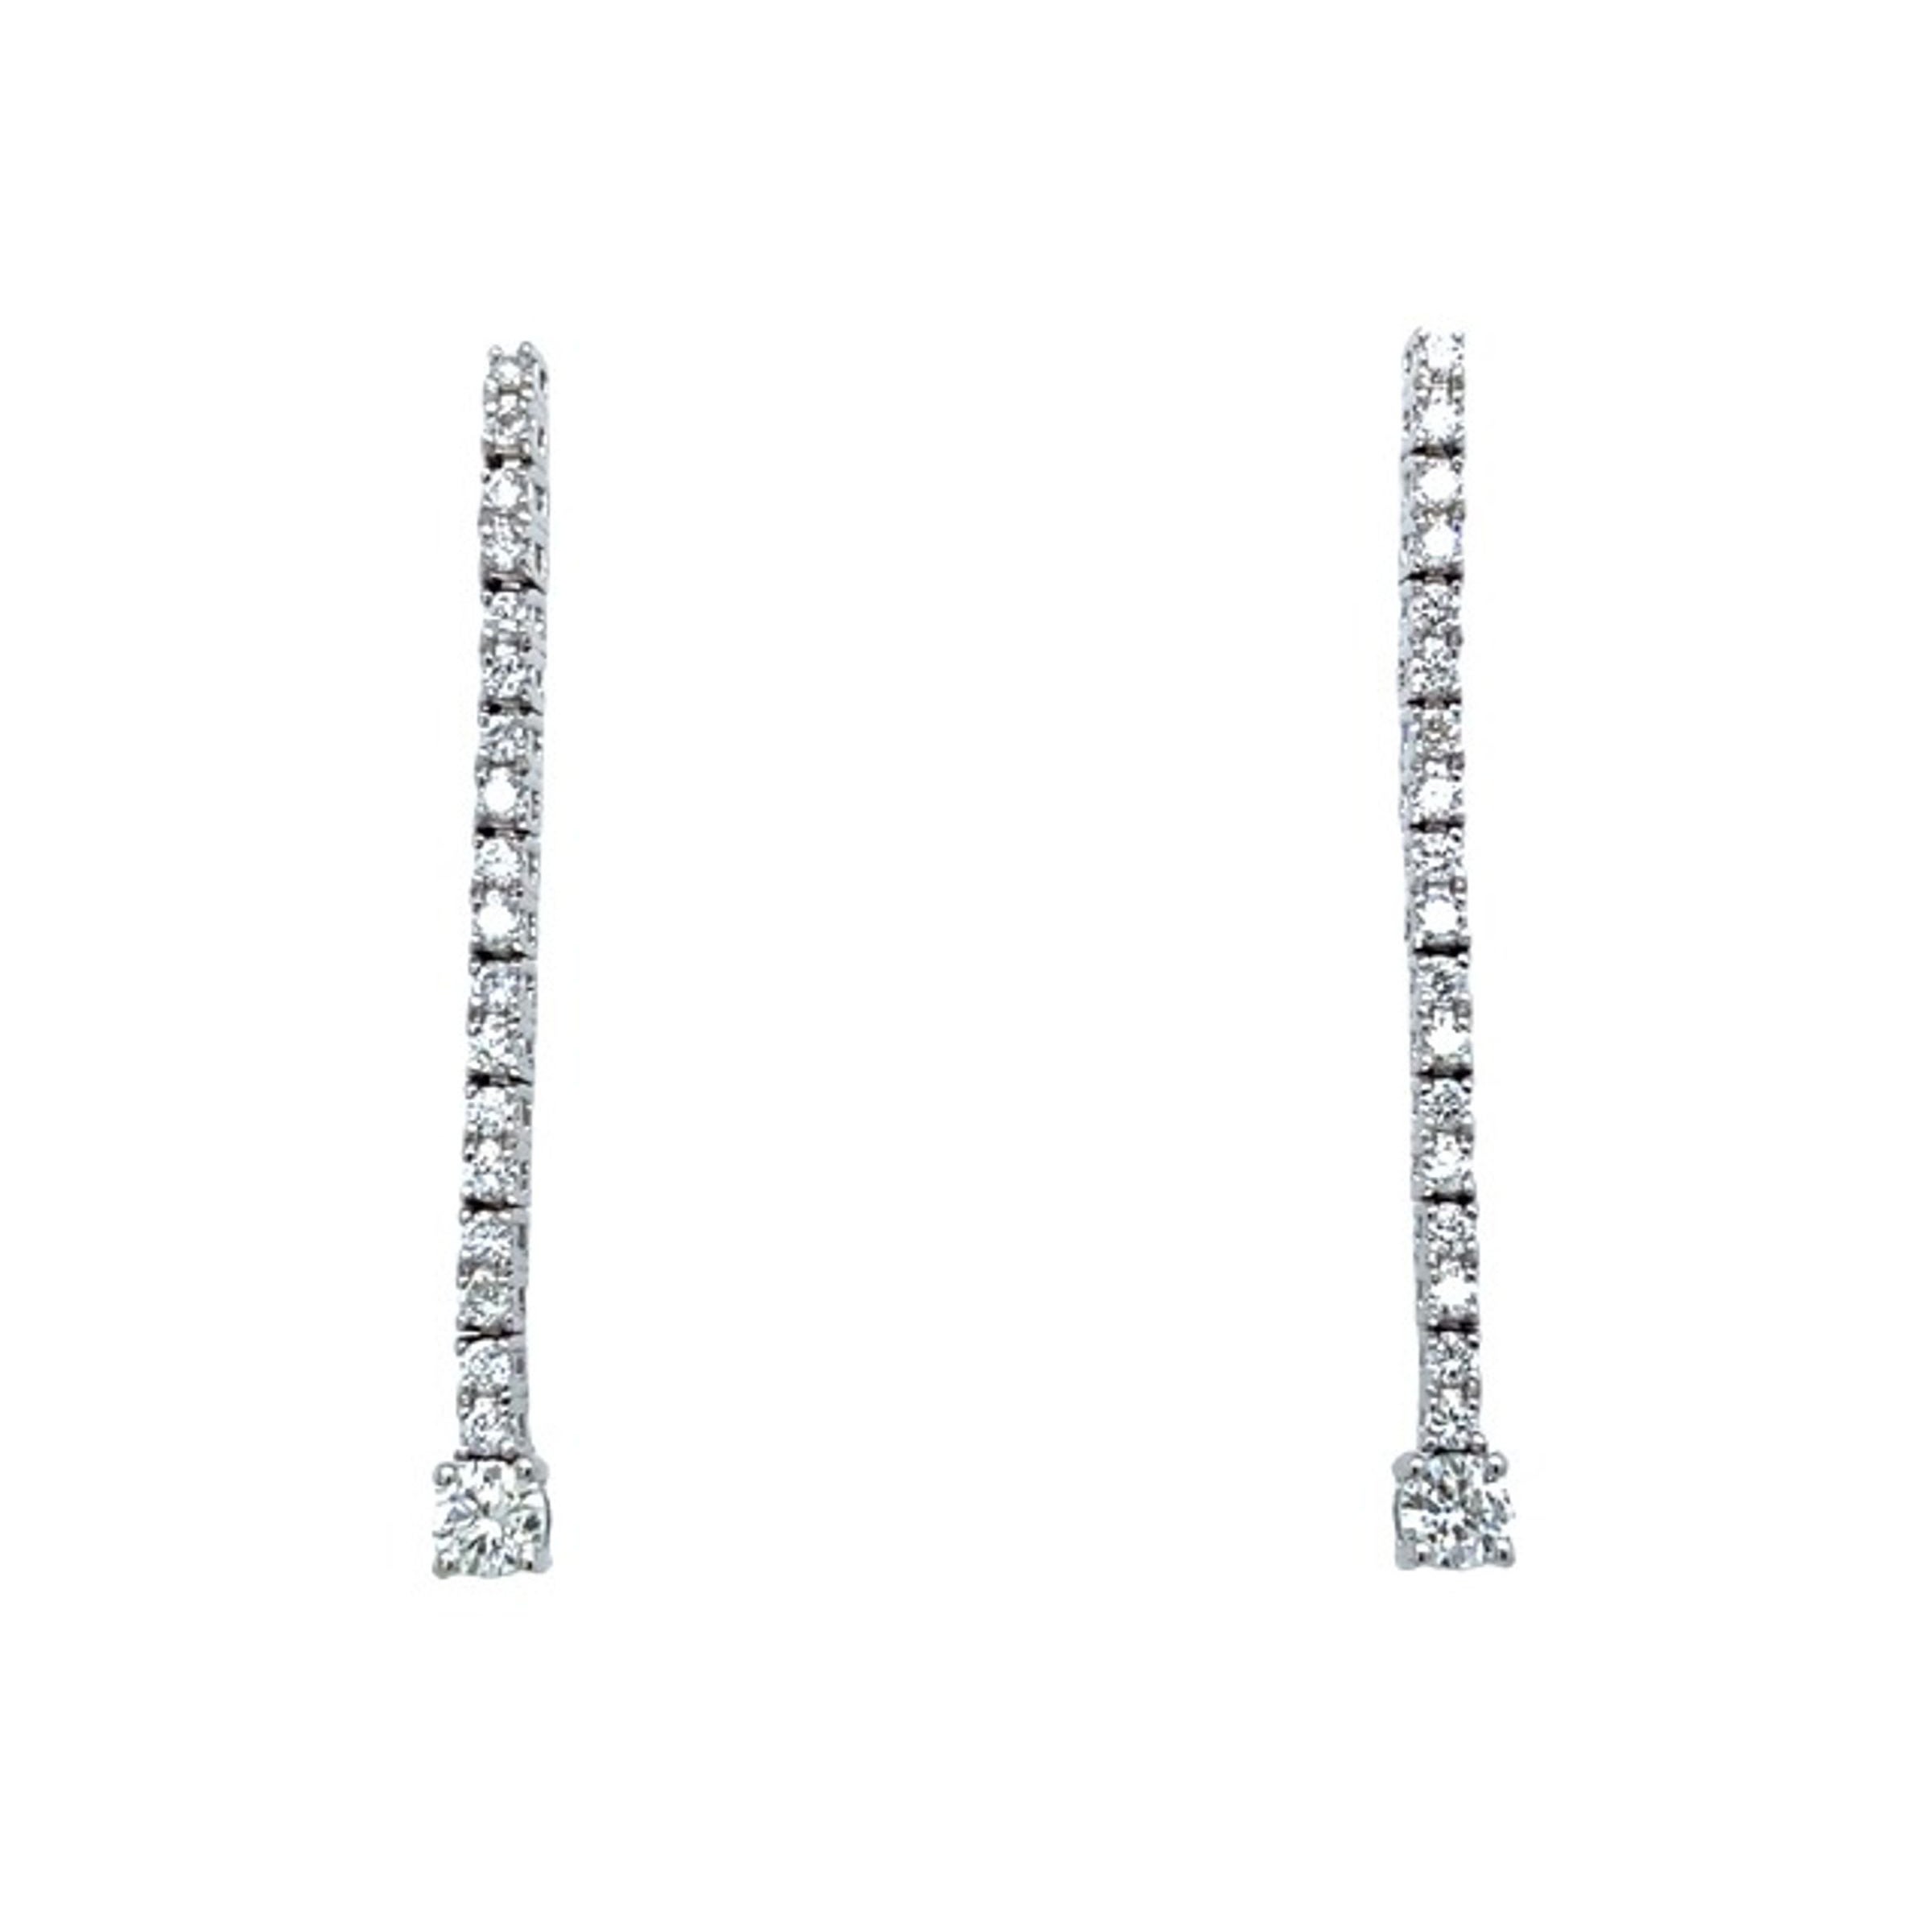 New Diamond Tennis Earrings Set with 0.56ct of Diamonds in 18ct White Gold